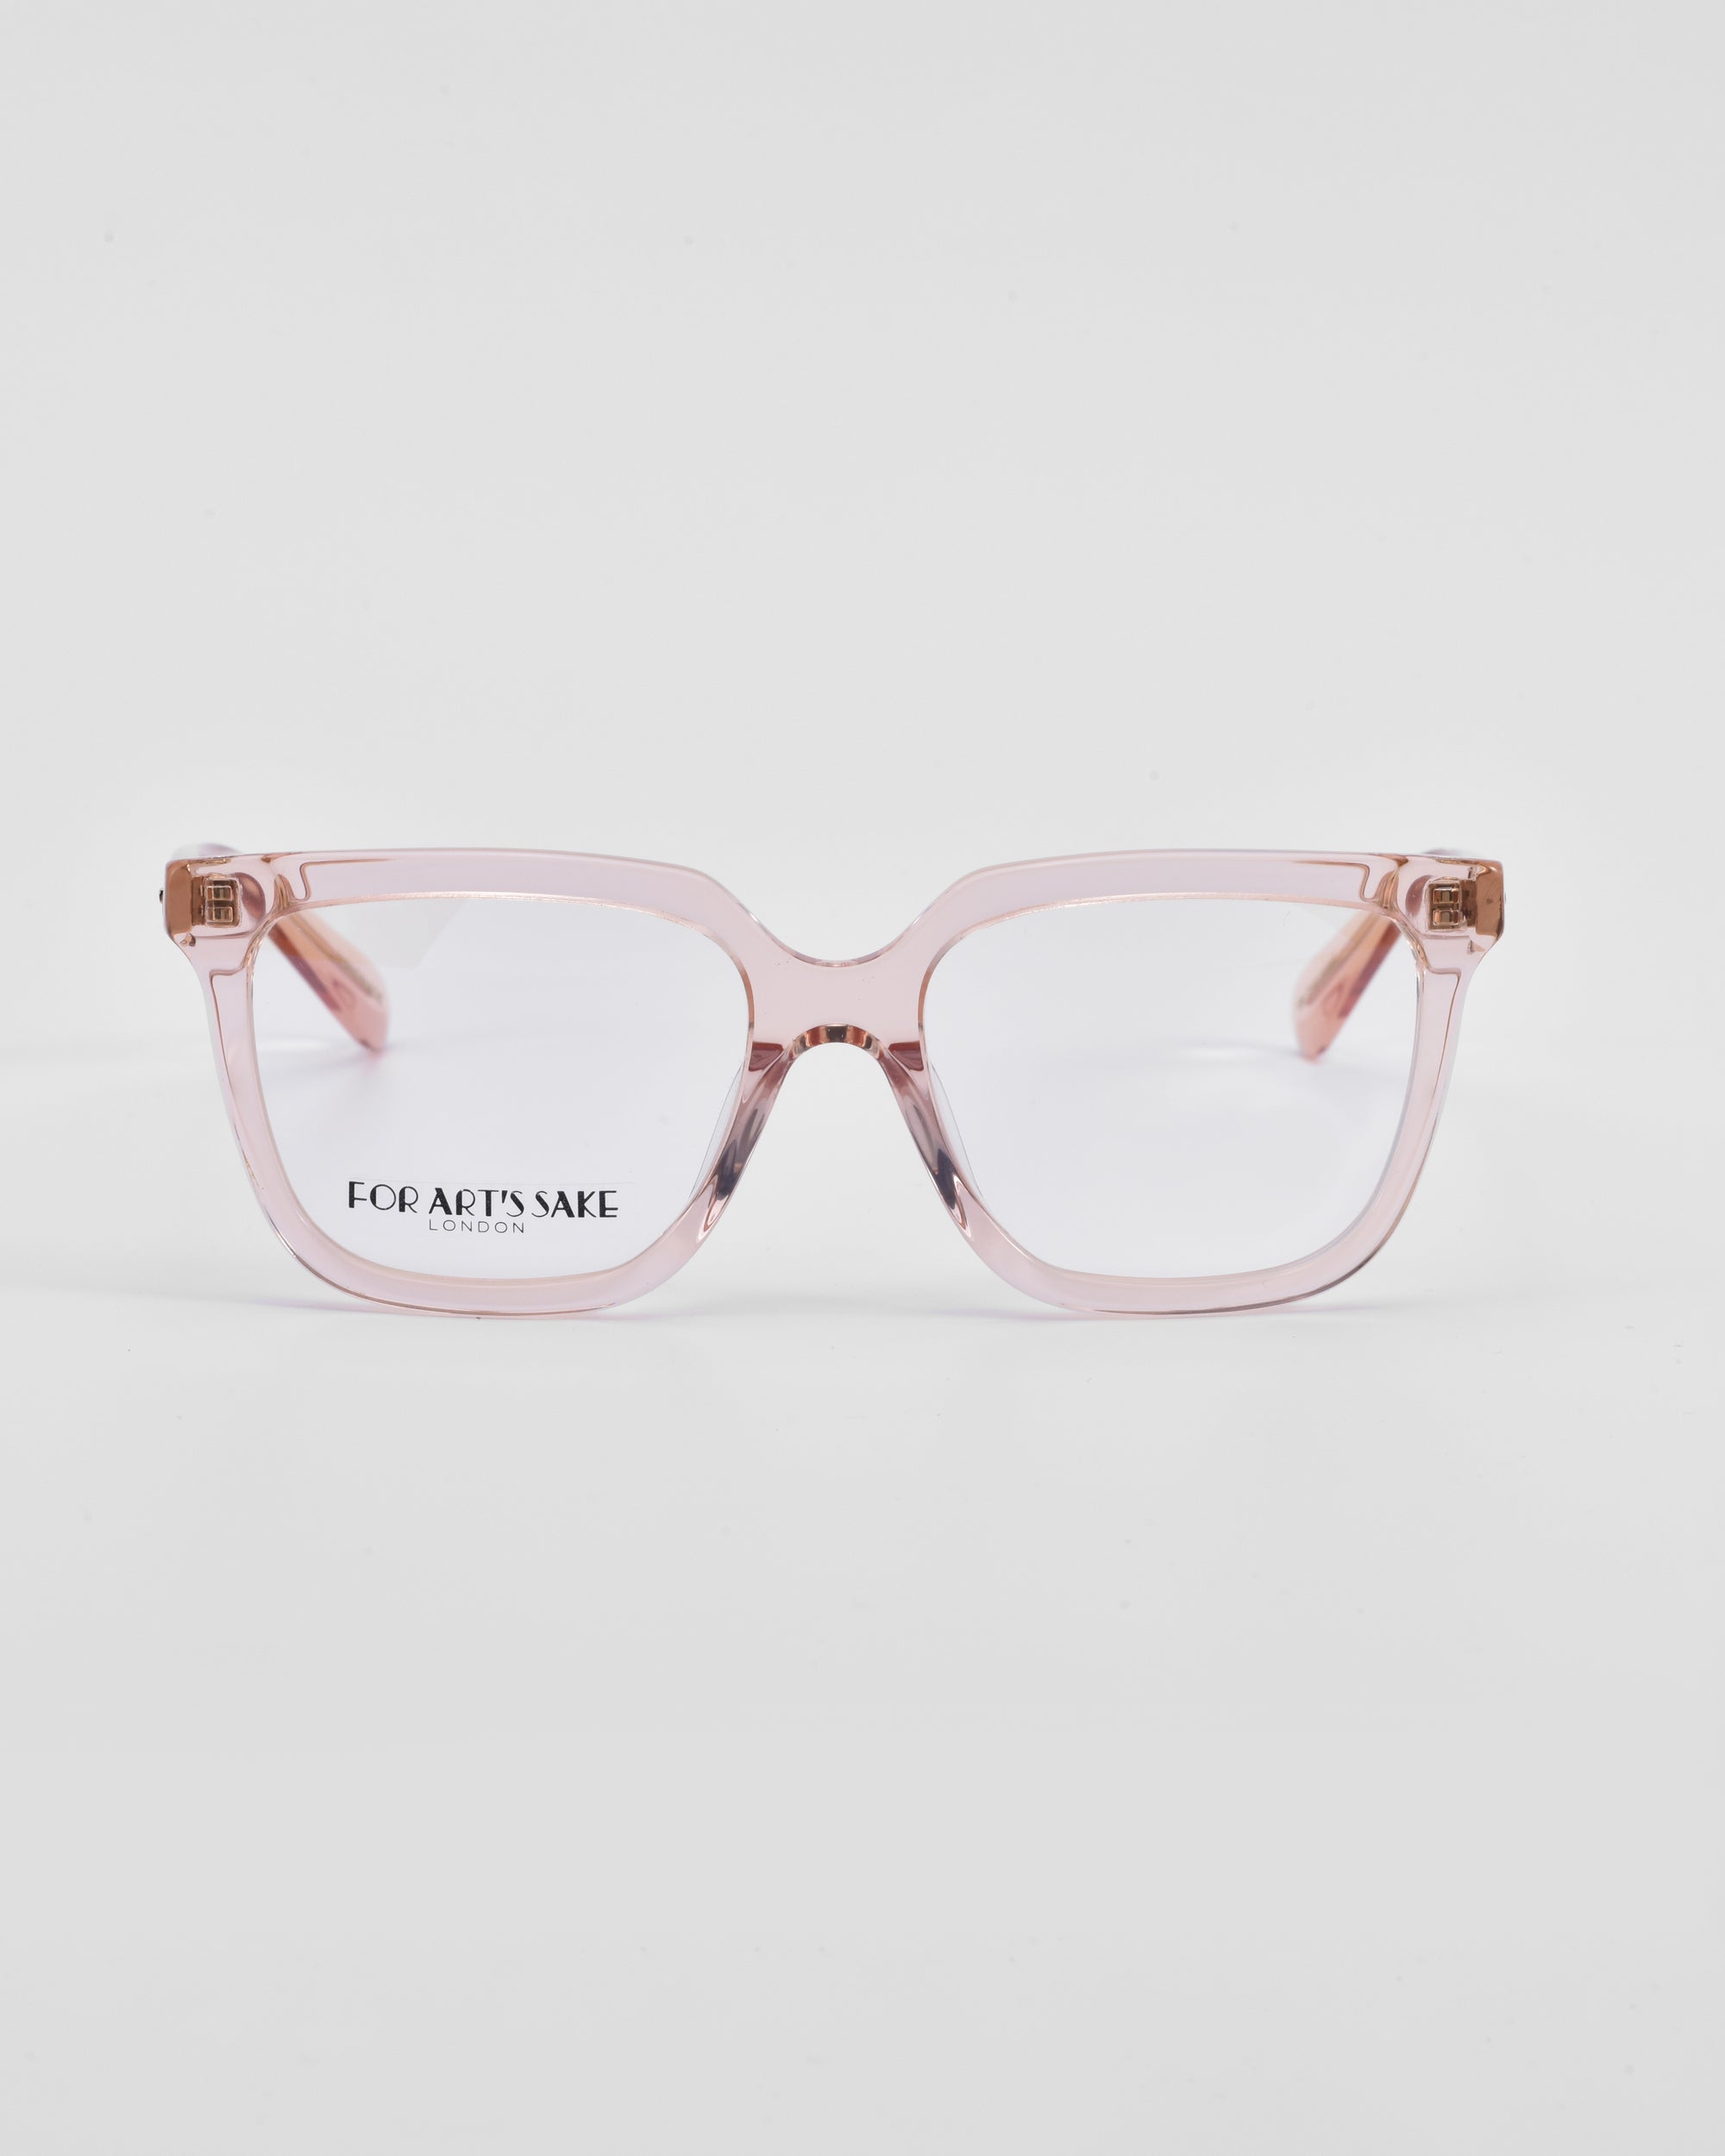 A pair of pink, square-framed eyeglasses with clear lenses and a classic square silhouette. The brand name "For Art's Sake®" is visible on the left lens. The background is plain white. Product Name: Nina